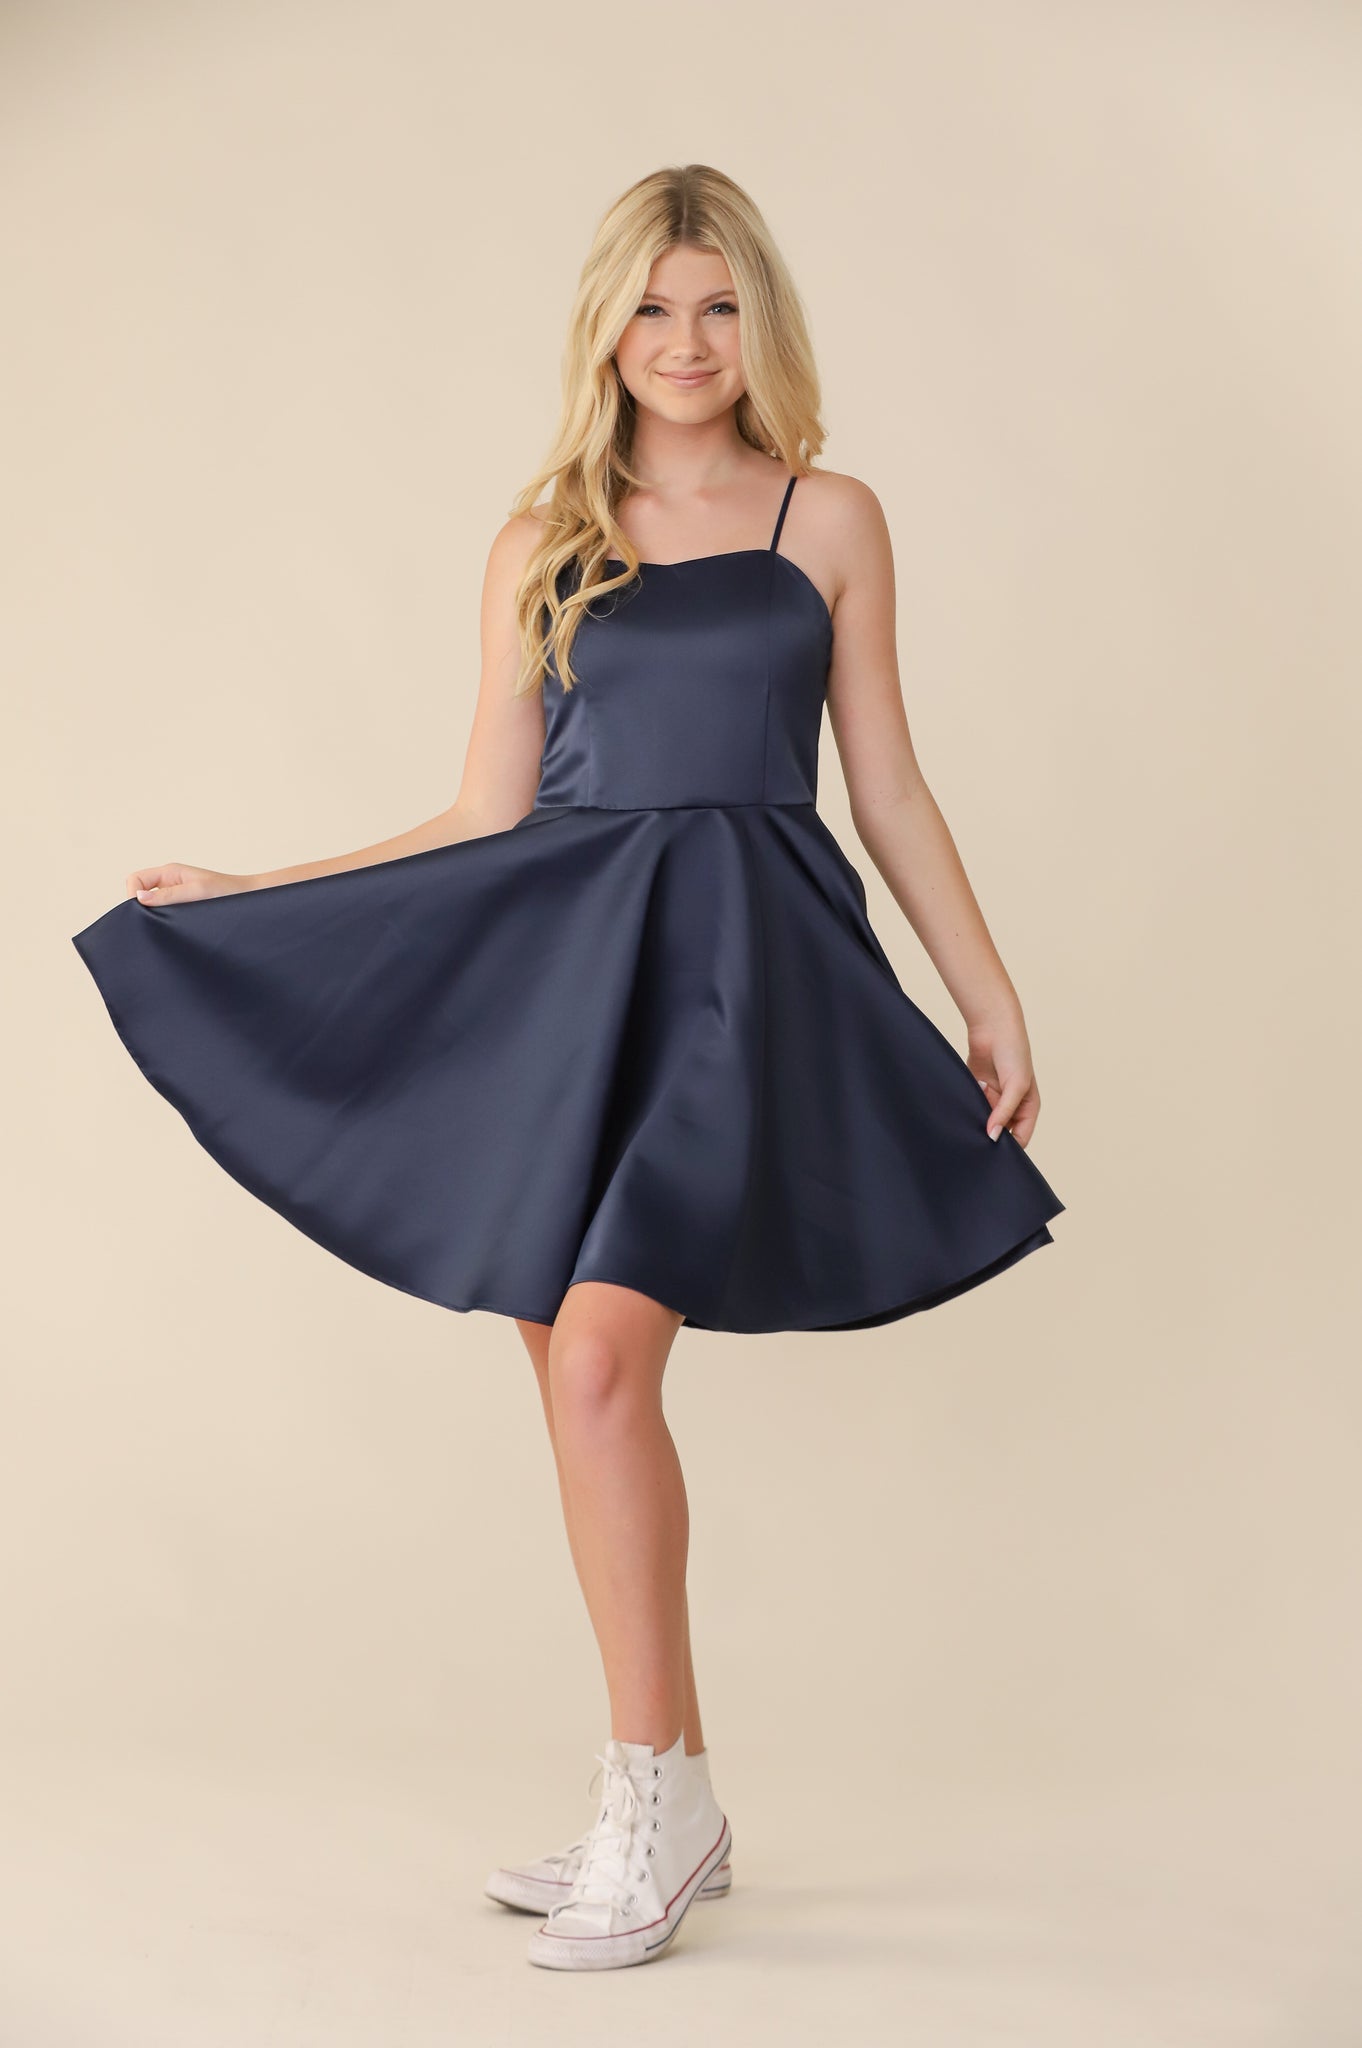 Blonde girl in a Un Deux Trois fit and flare navy satin dress.